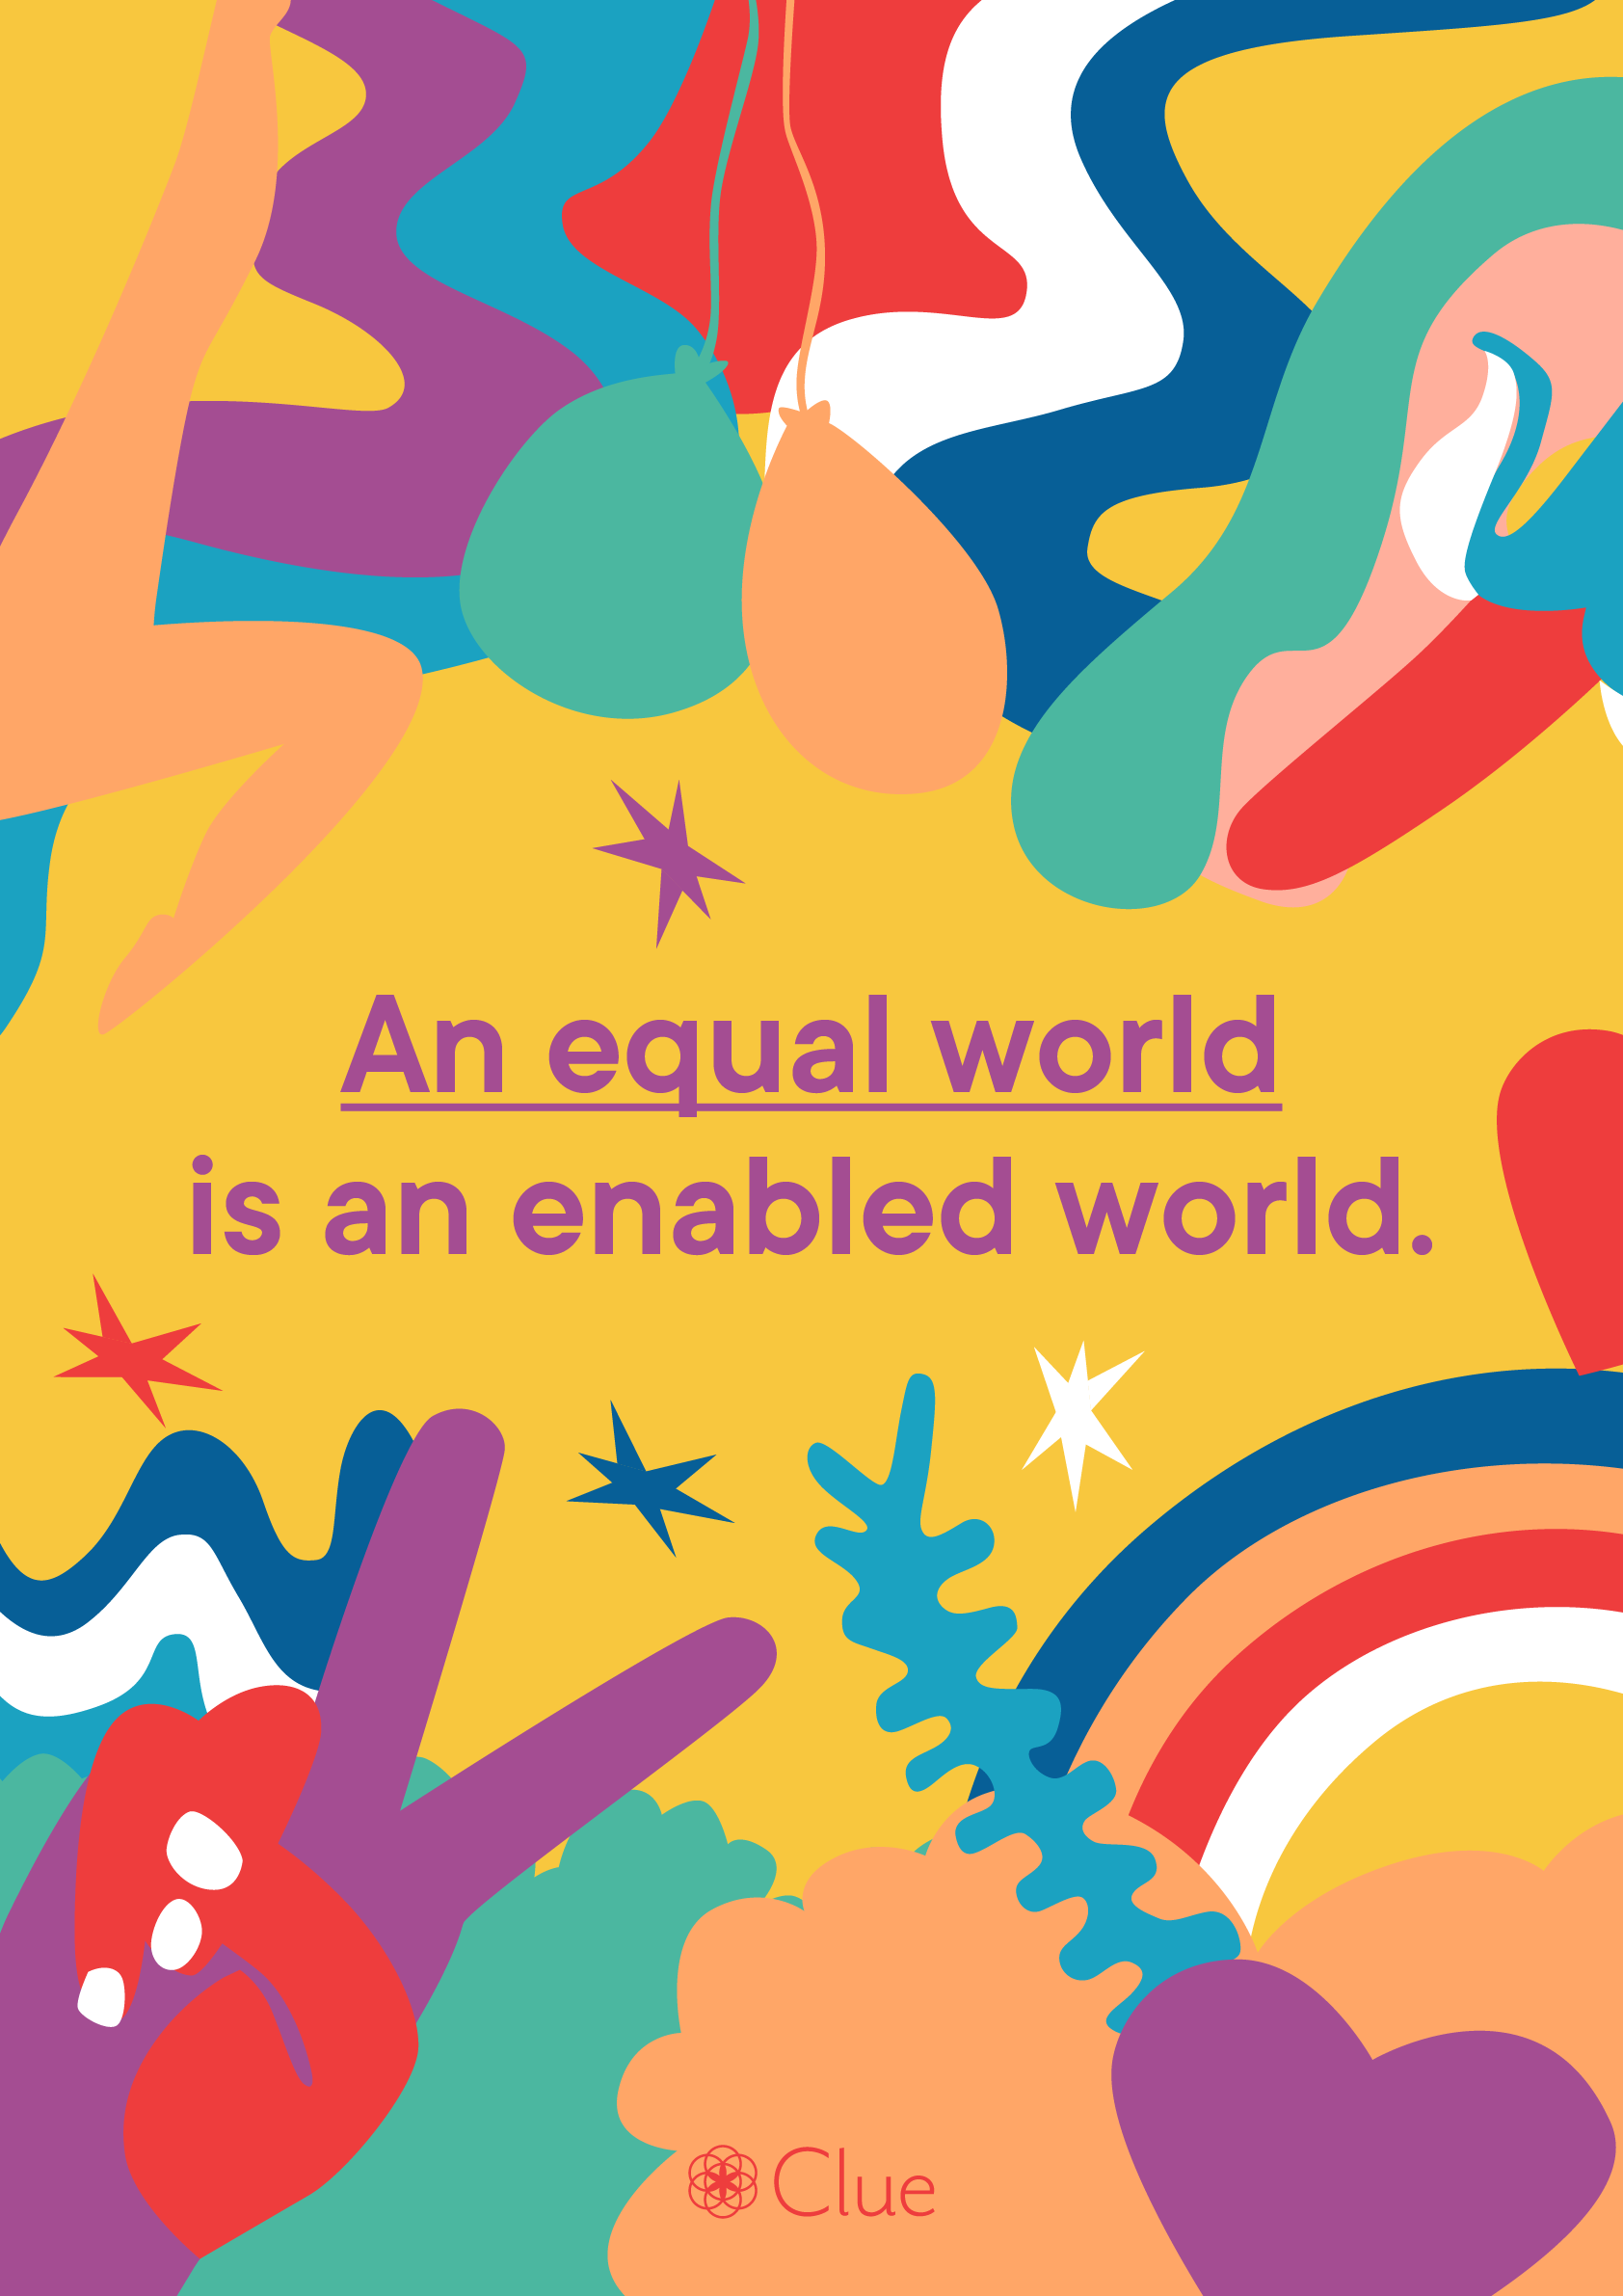 "An Equal World is an Enabled World" - International Women's Day poster